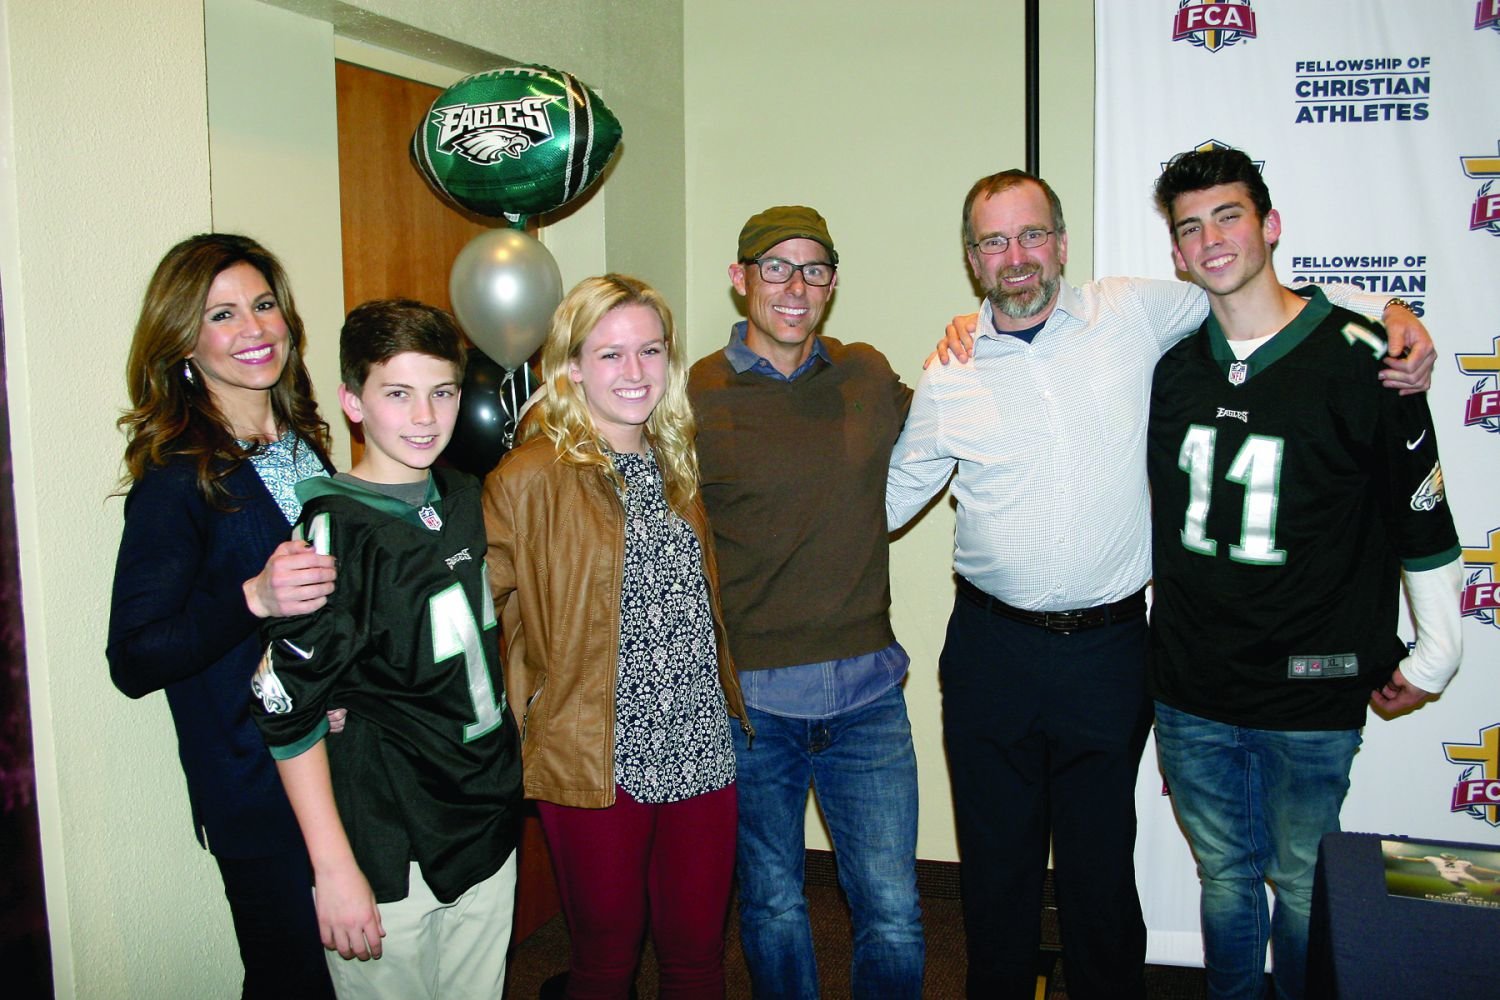 Former Philadelphia Eagles kicker David Akers gathers with the Loving family. CB East alumna Emma Loving, third from left, a junior soccer player at Penn, was one of two student-athletes who spoke at a Fellowship of Christian Athletes event on April 5 at Cairn University.